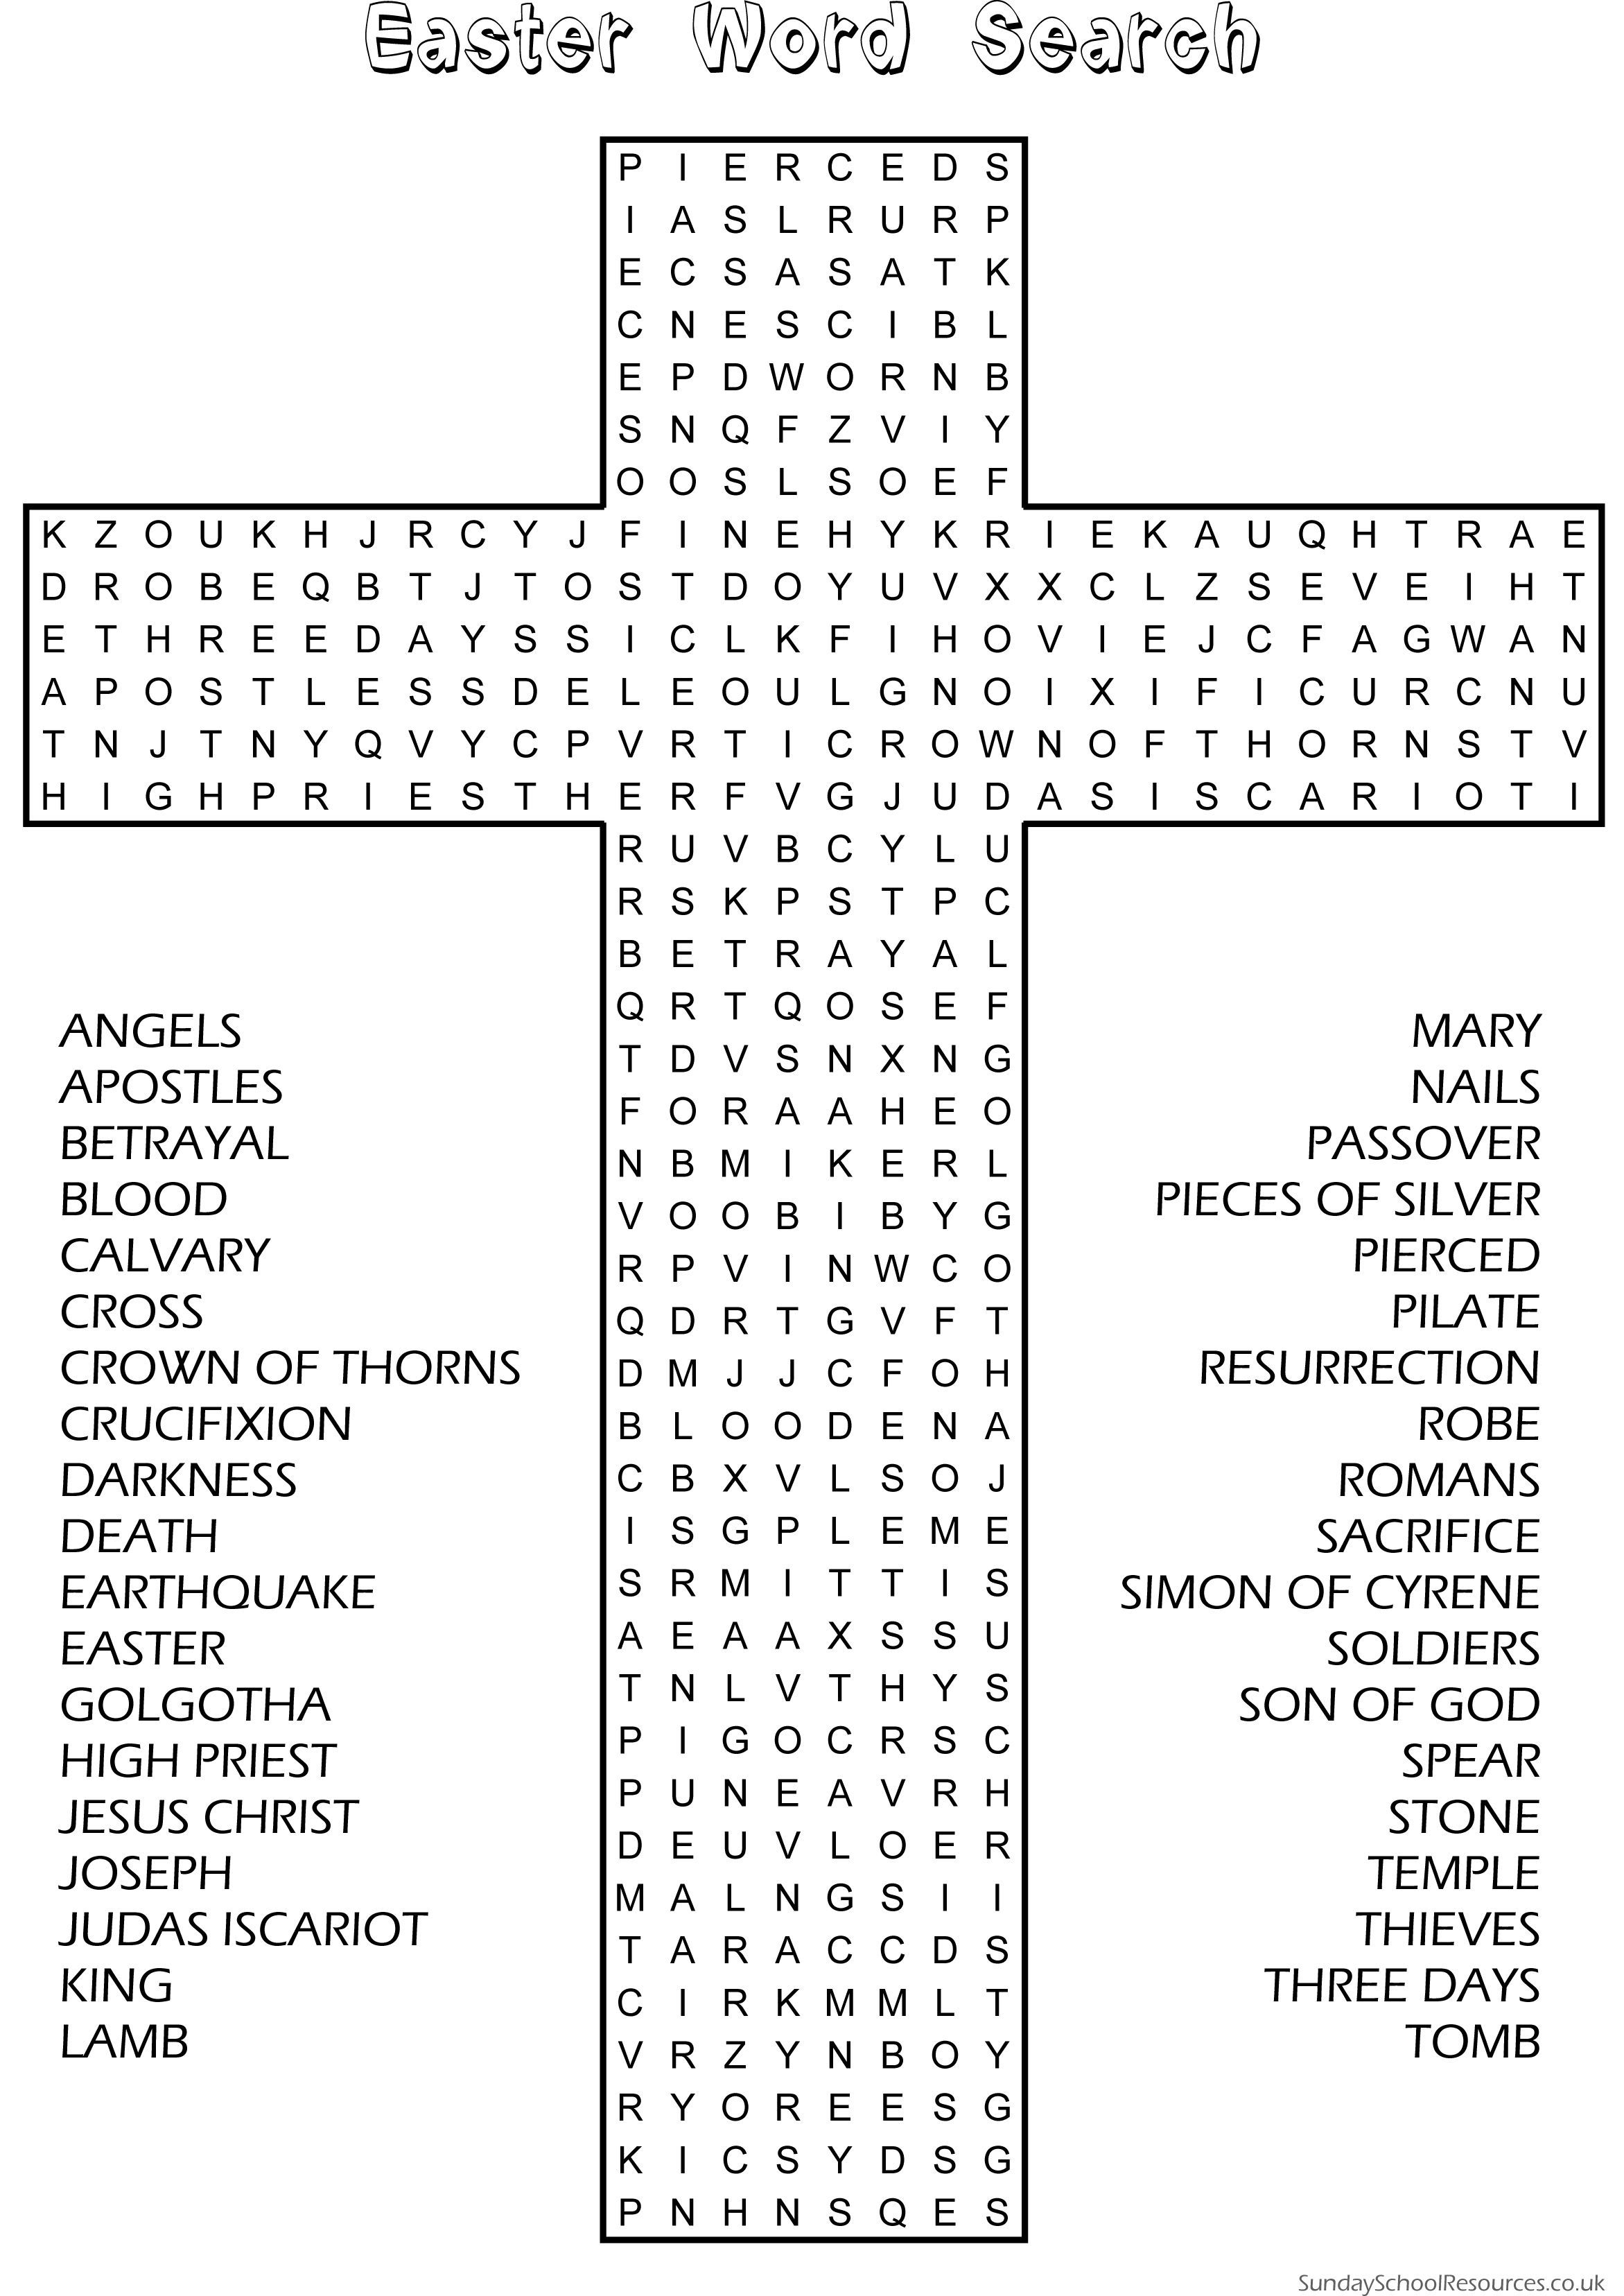 Easter Word Search – Sunday School Activity  website has good material